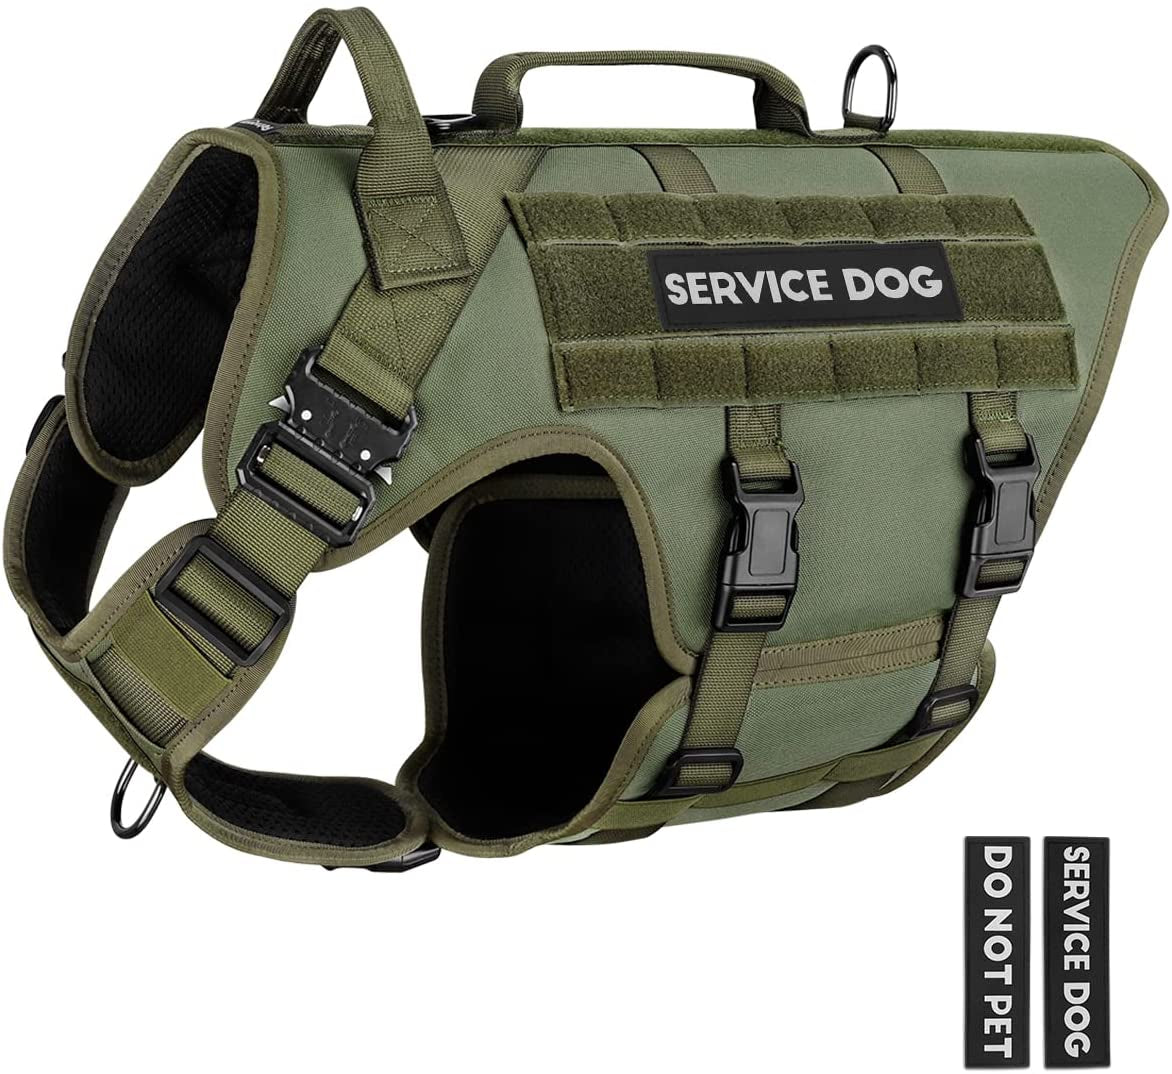 Tactical Dog Harness - PETNANNY Service Dog Vest for Large Dogs Fully Body Coverage in Training Dog Harness with 2 Reflective Dog Patches, Handle, Hook and Loop Panels, Walking Hunting Dog MOLLE Vest Animals & Pet Supplies > Pet Supplies > Dog Supplies > Dog Apparel PETNANNY Green Medium 